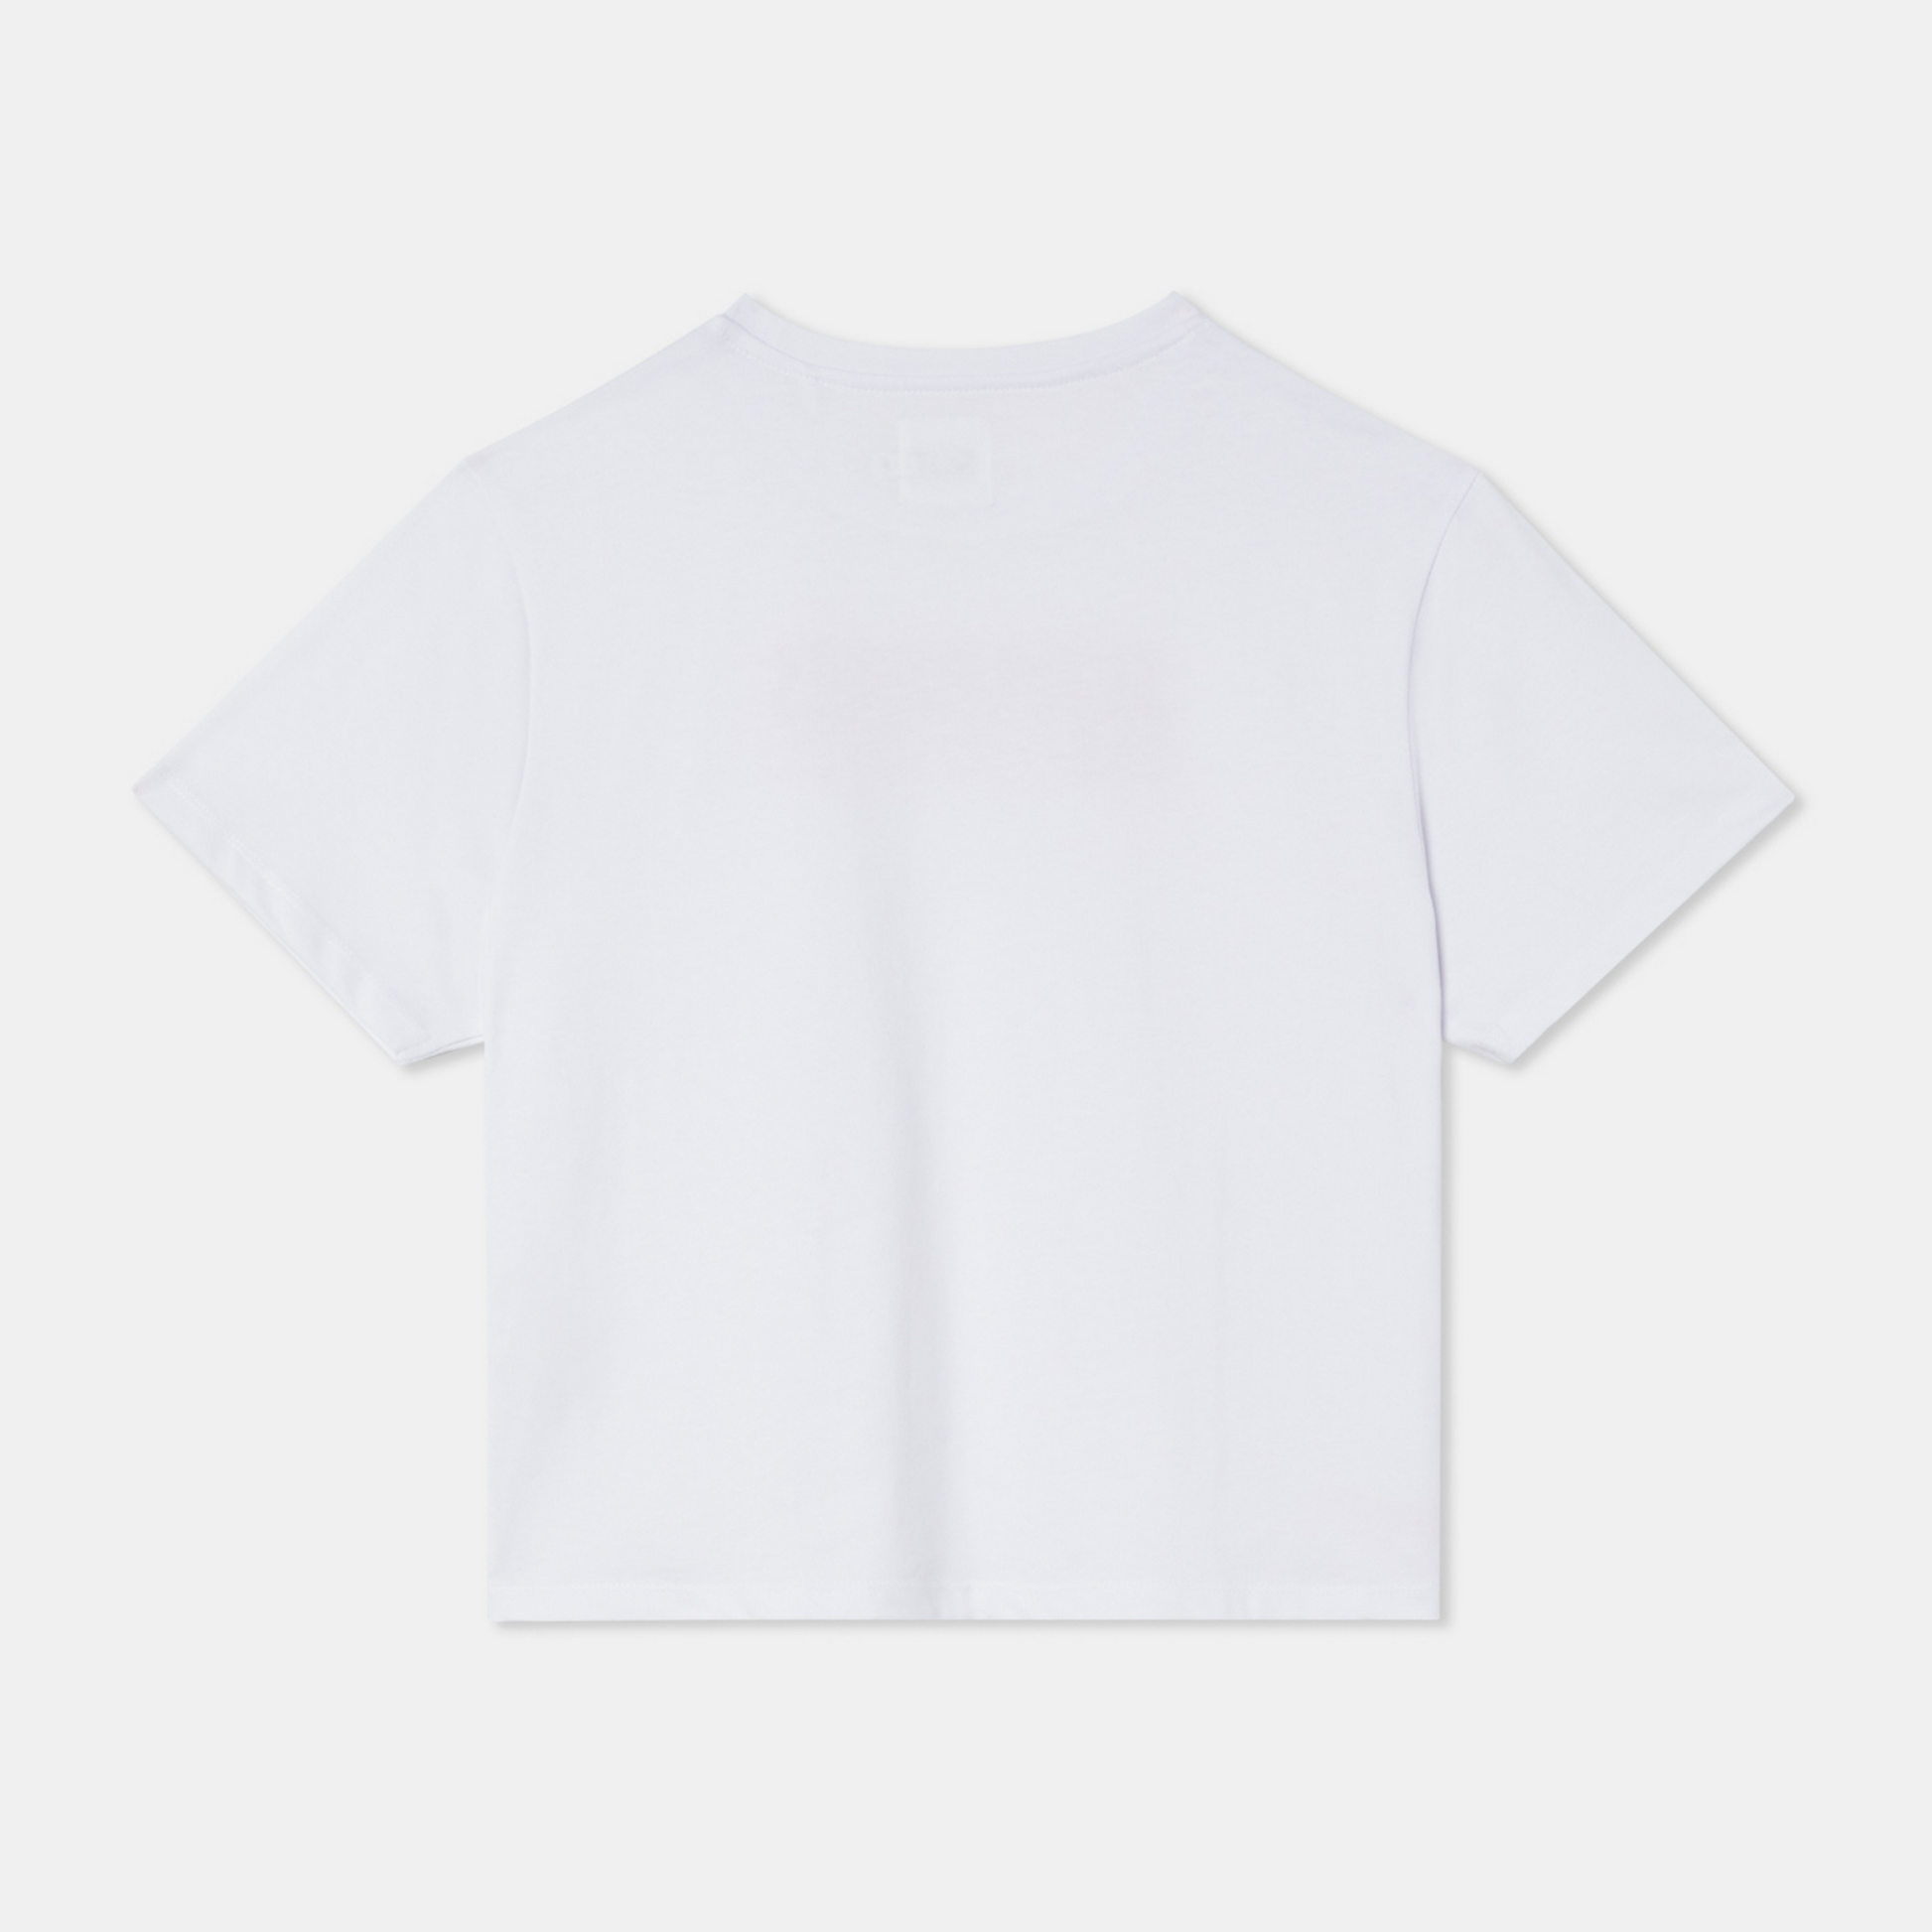 T-shirt middle crop white back